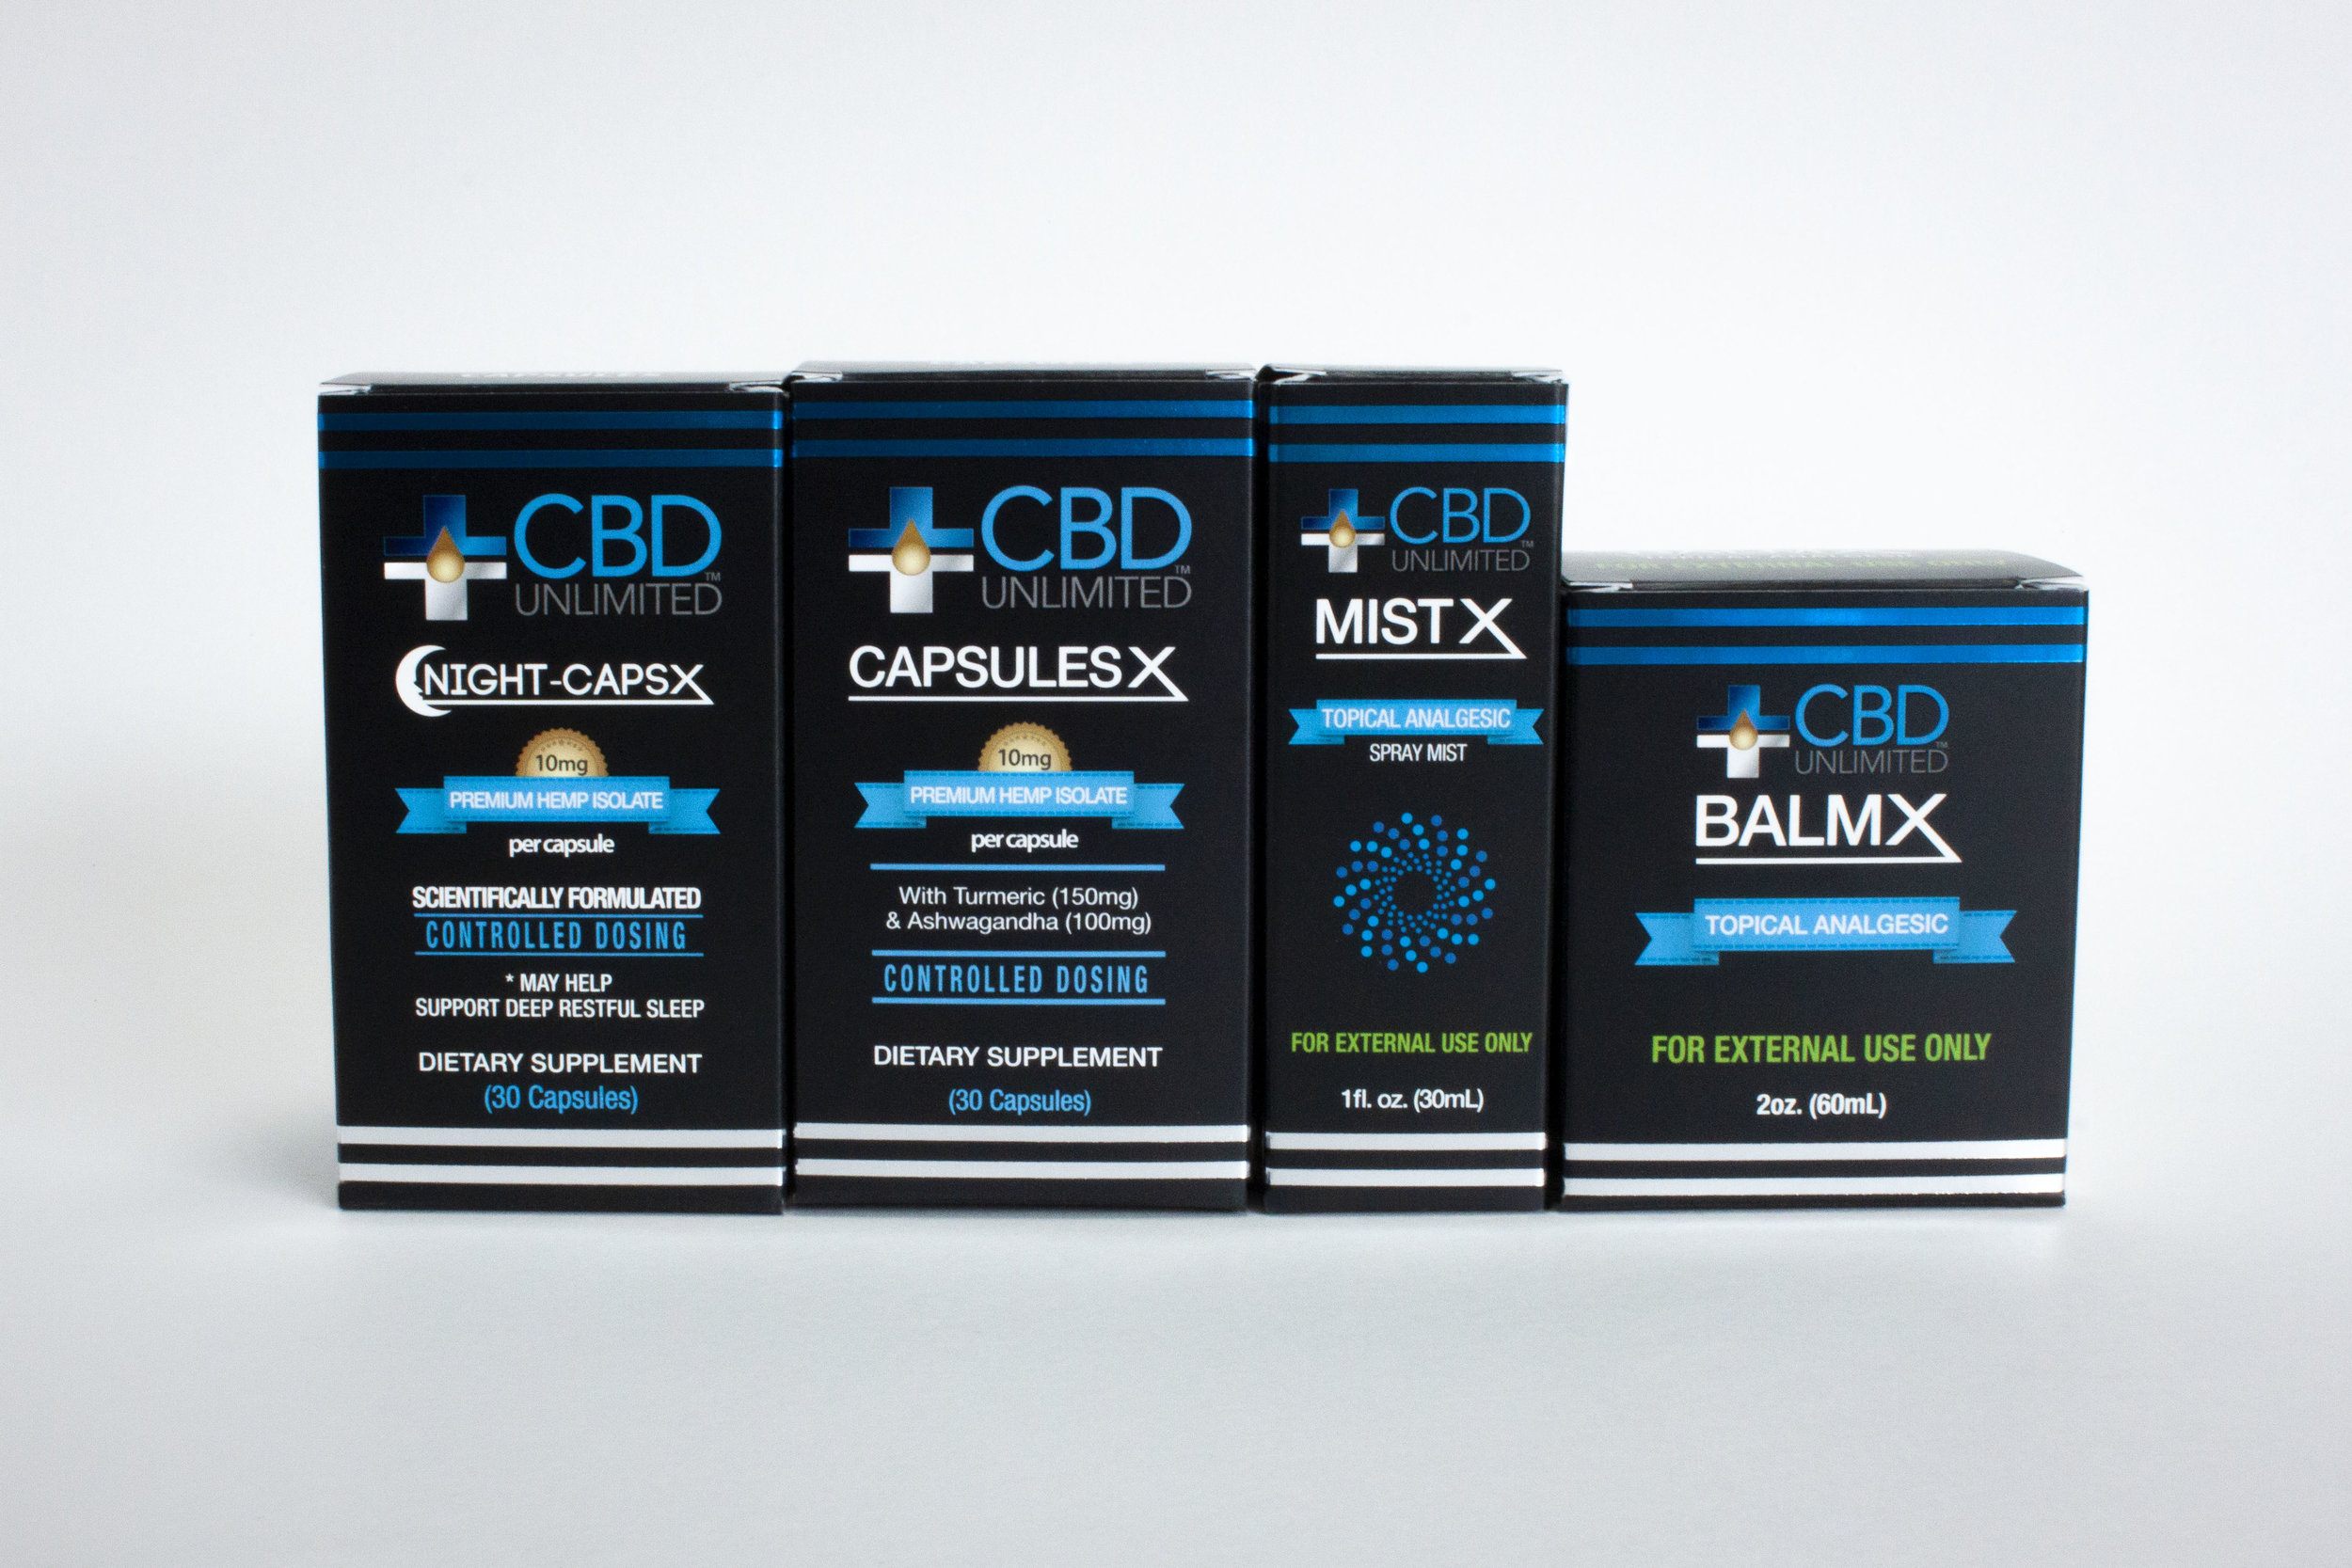 CBD Unlimited Packaging